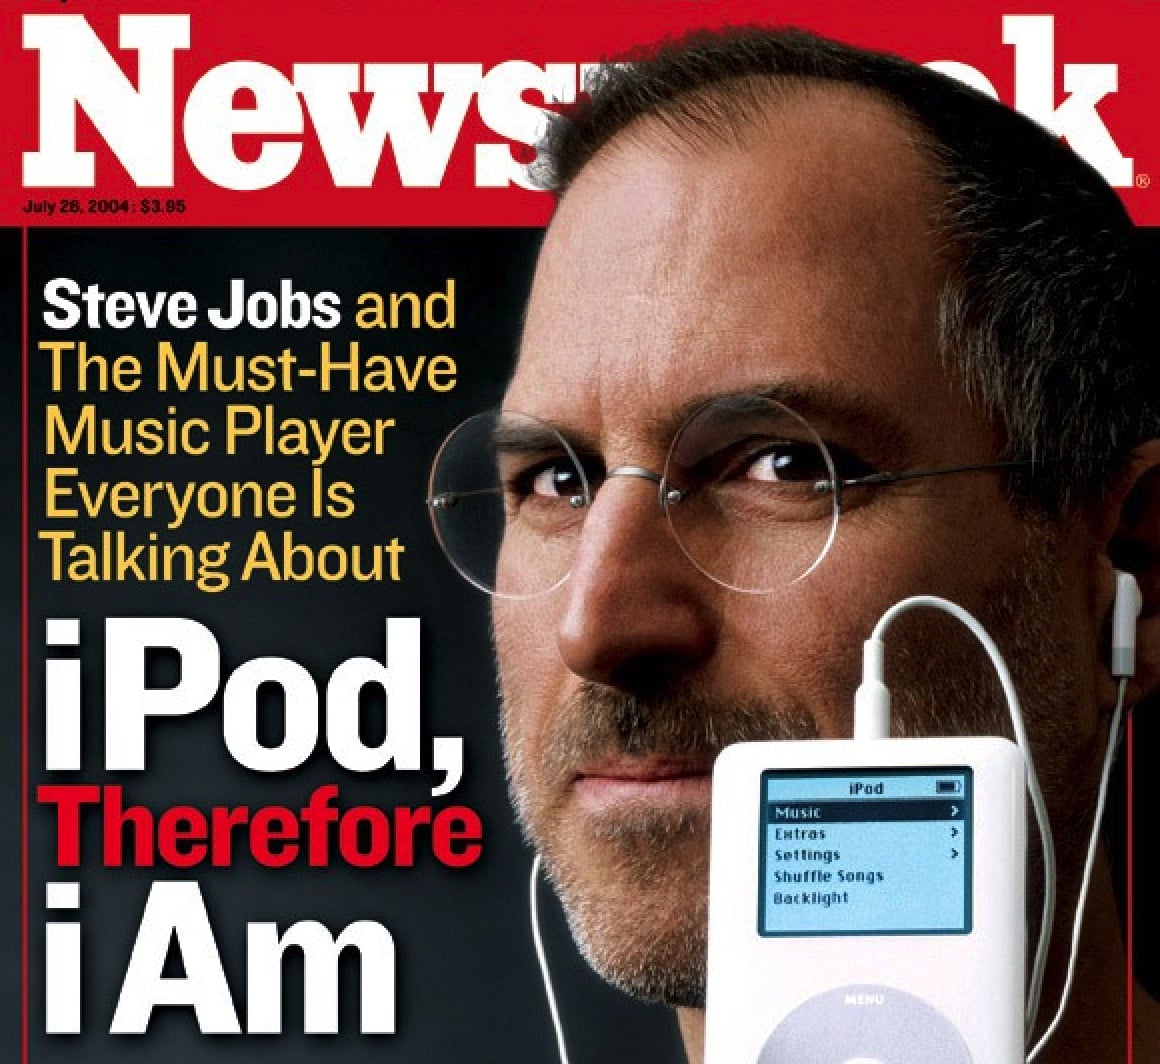 Today in Apple history: Apple puts 1,000 songs in your pocket with first-gen iPod